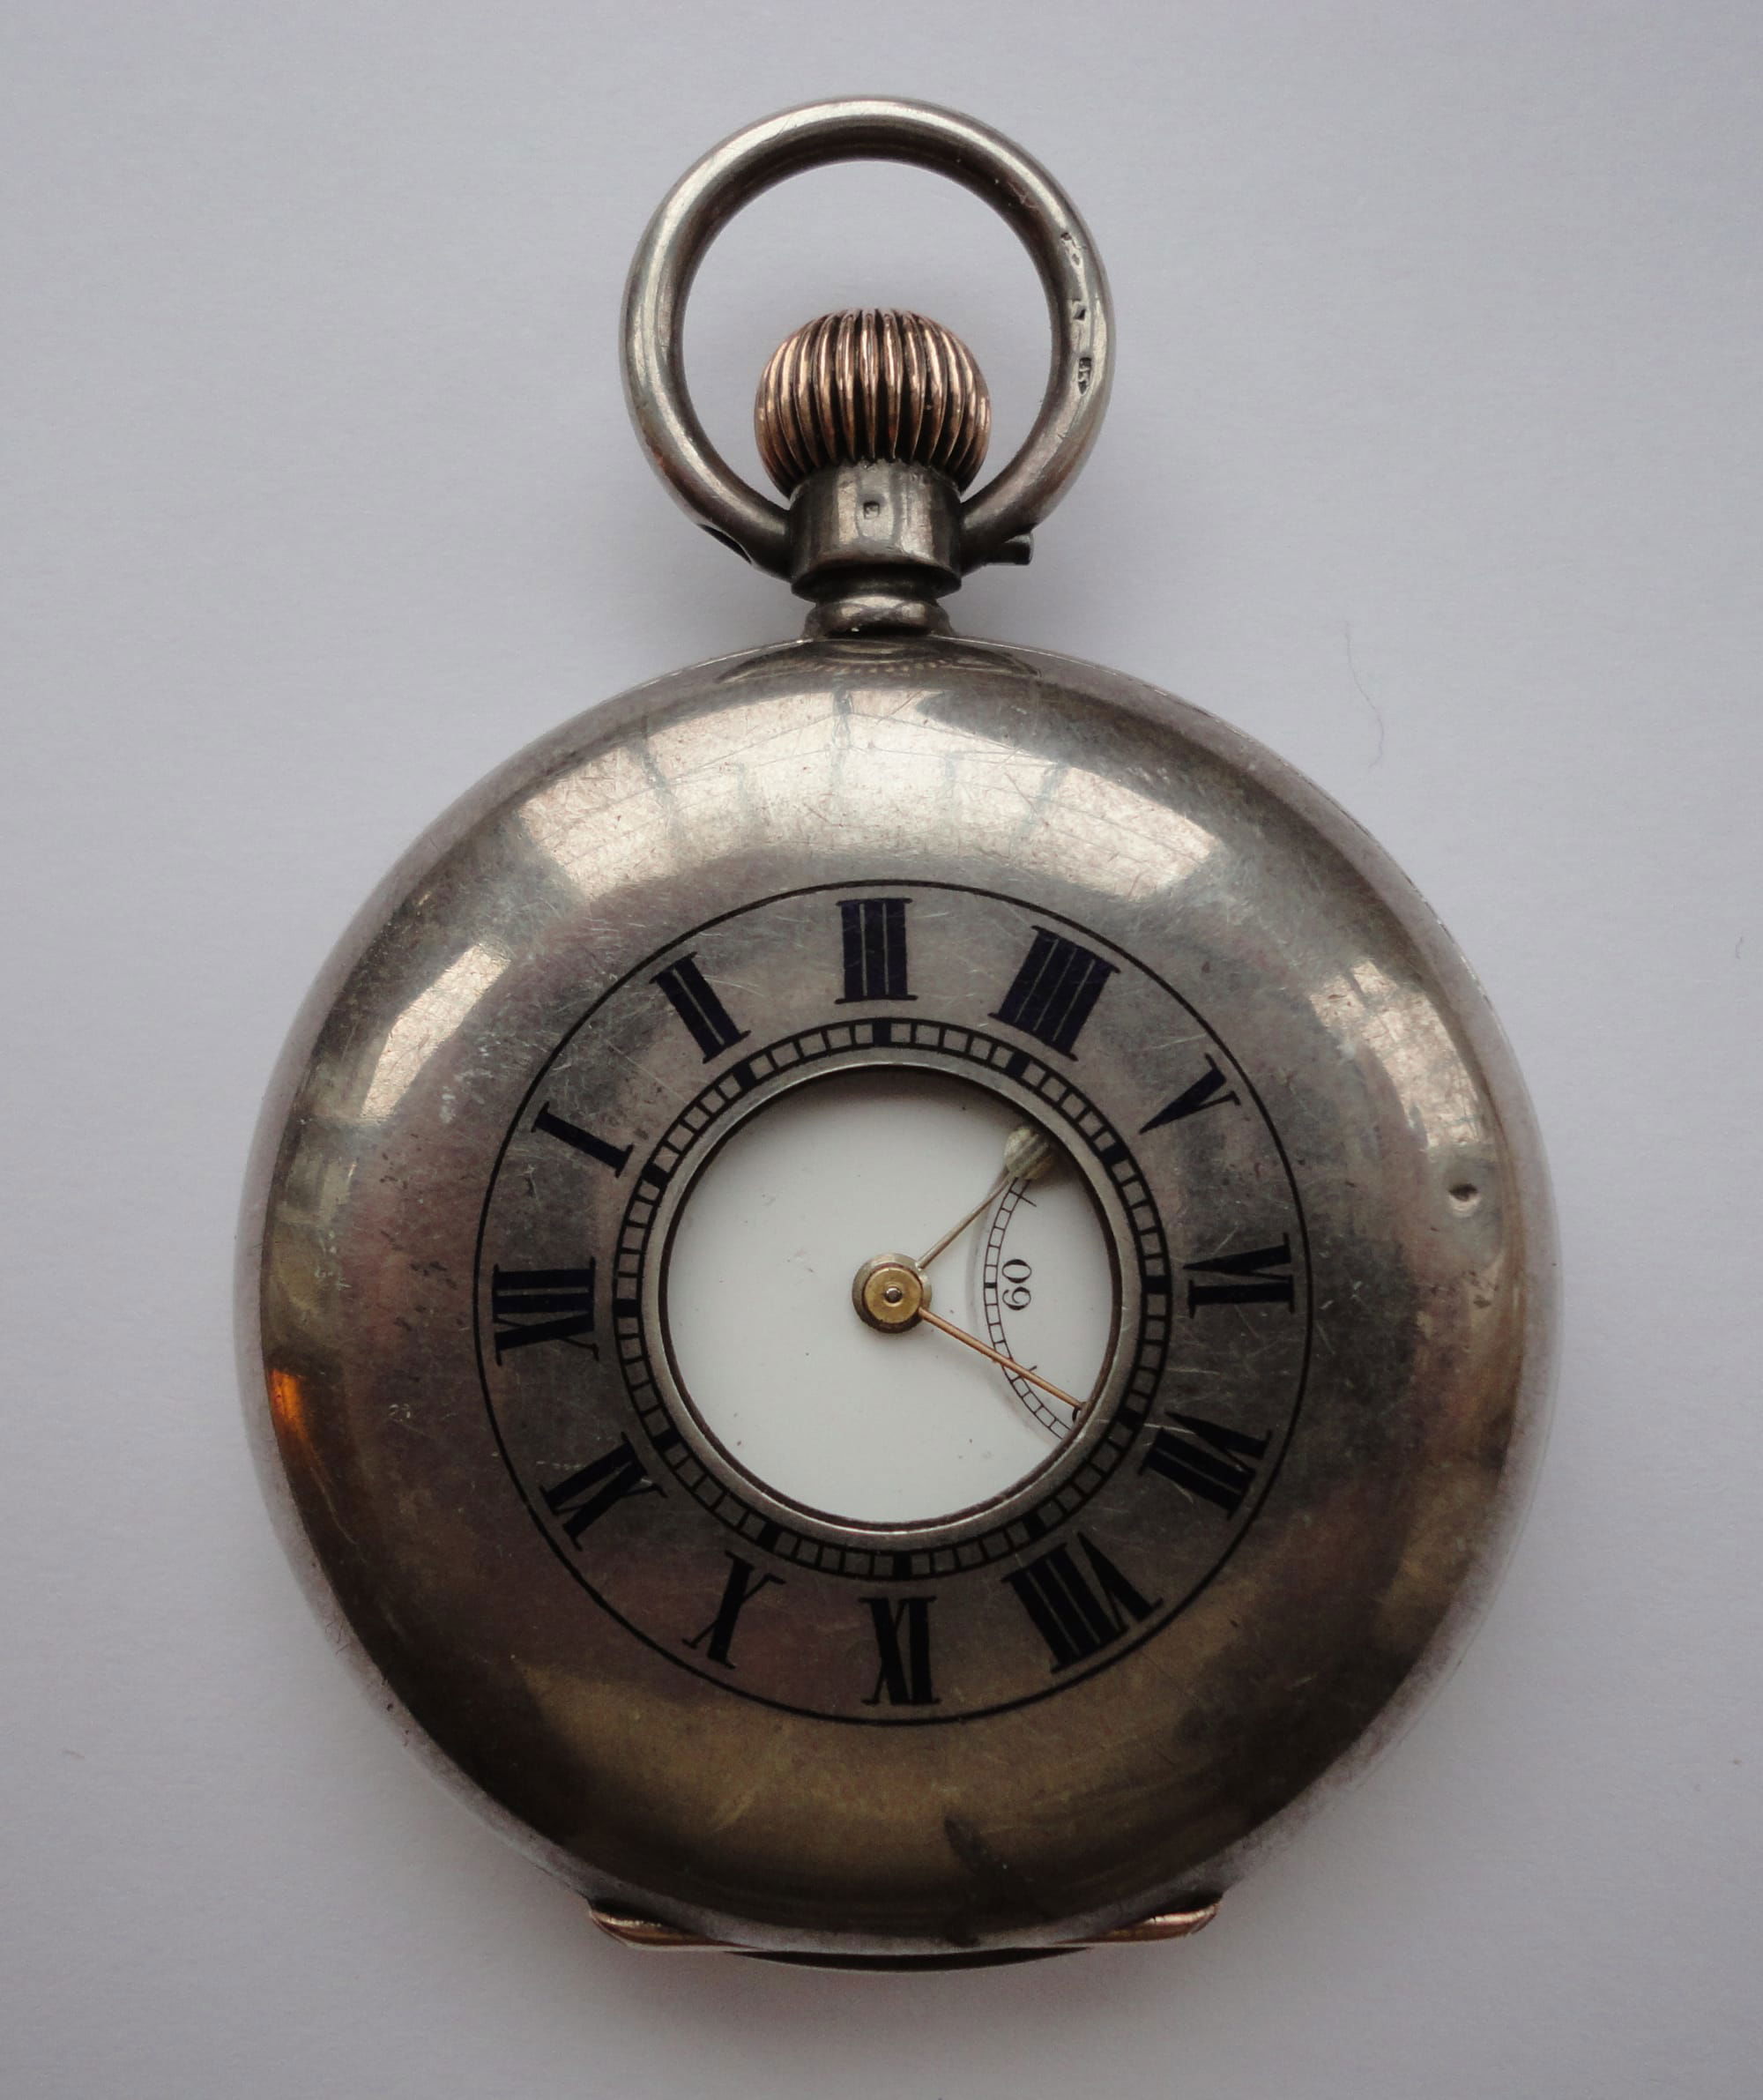 Pocket Watch Presented to Sgt S Smith 1st Battalion York and Lancaster Regiment